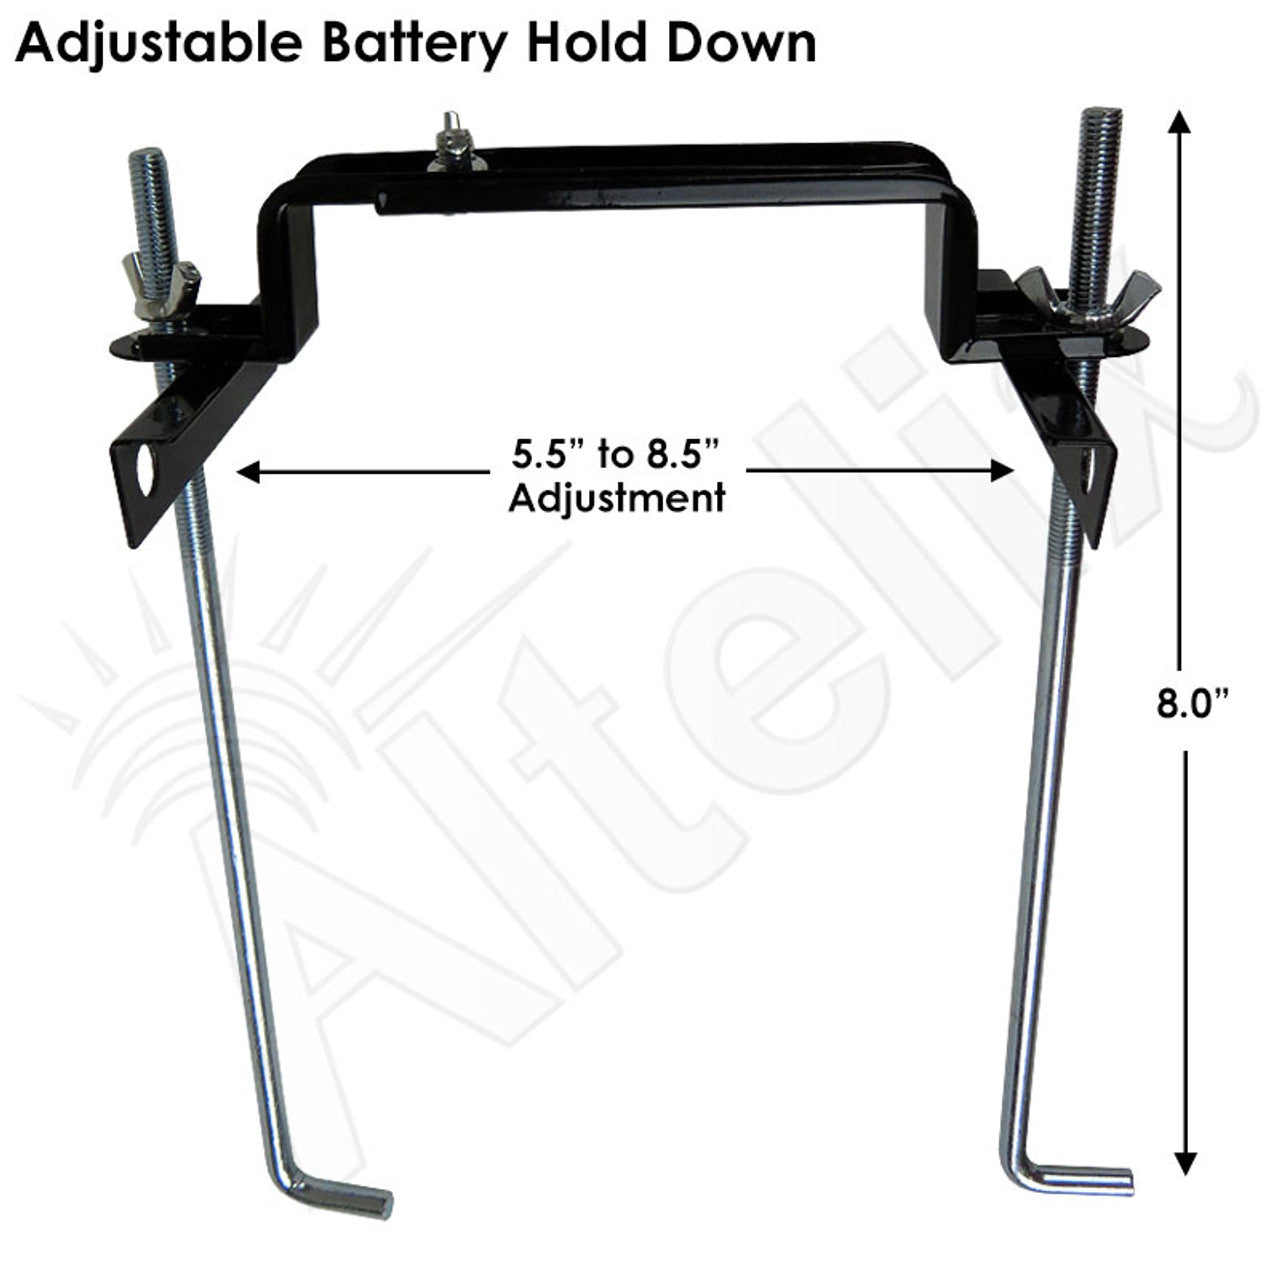 Steel Battery/Utility Shelf with Adjustable Battery Hold Down for NS Enclosures-3